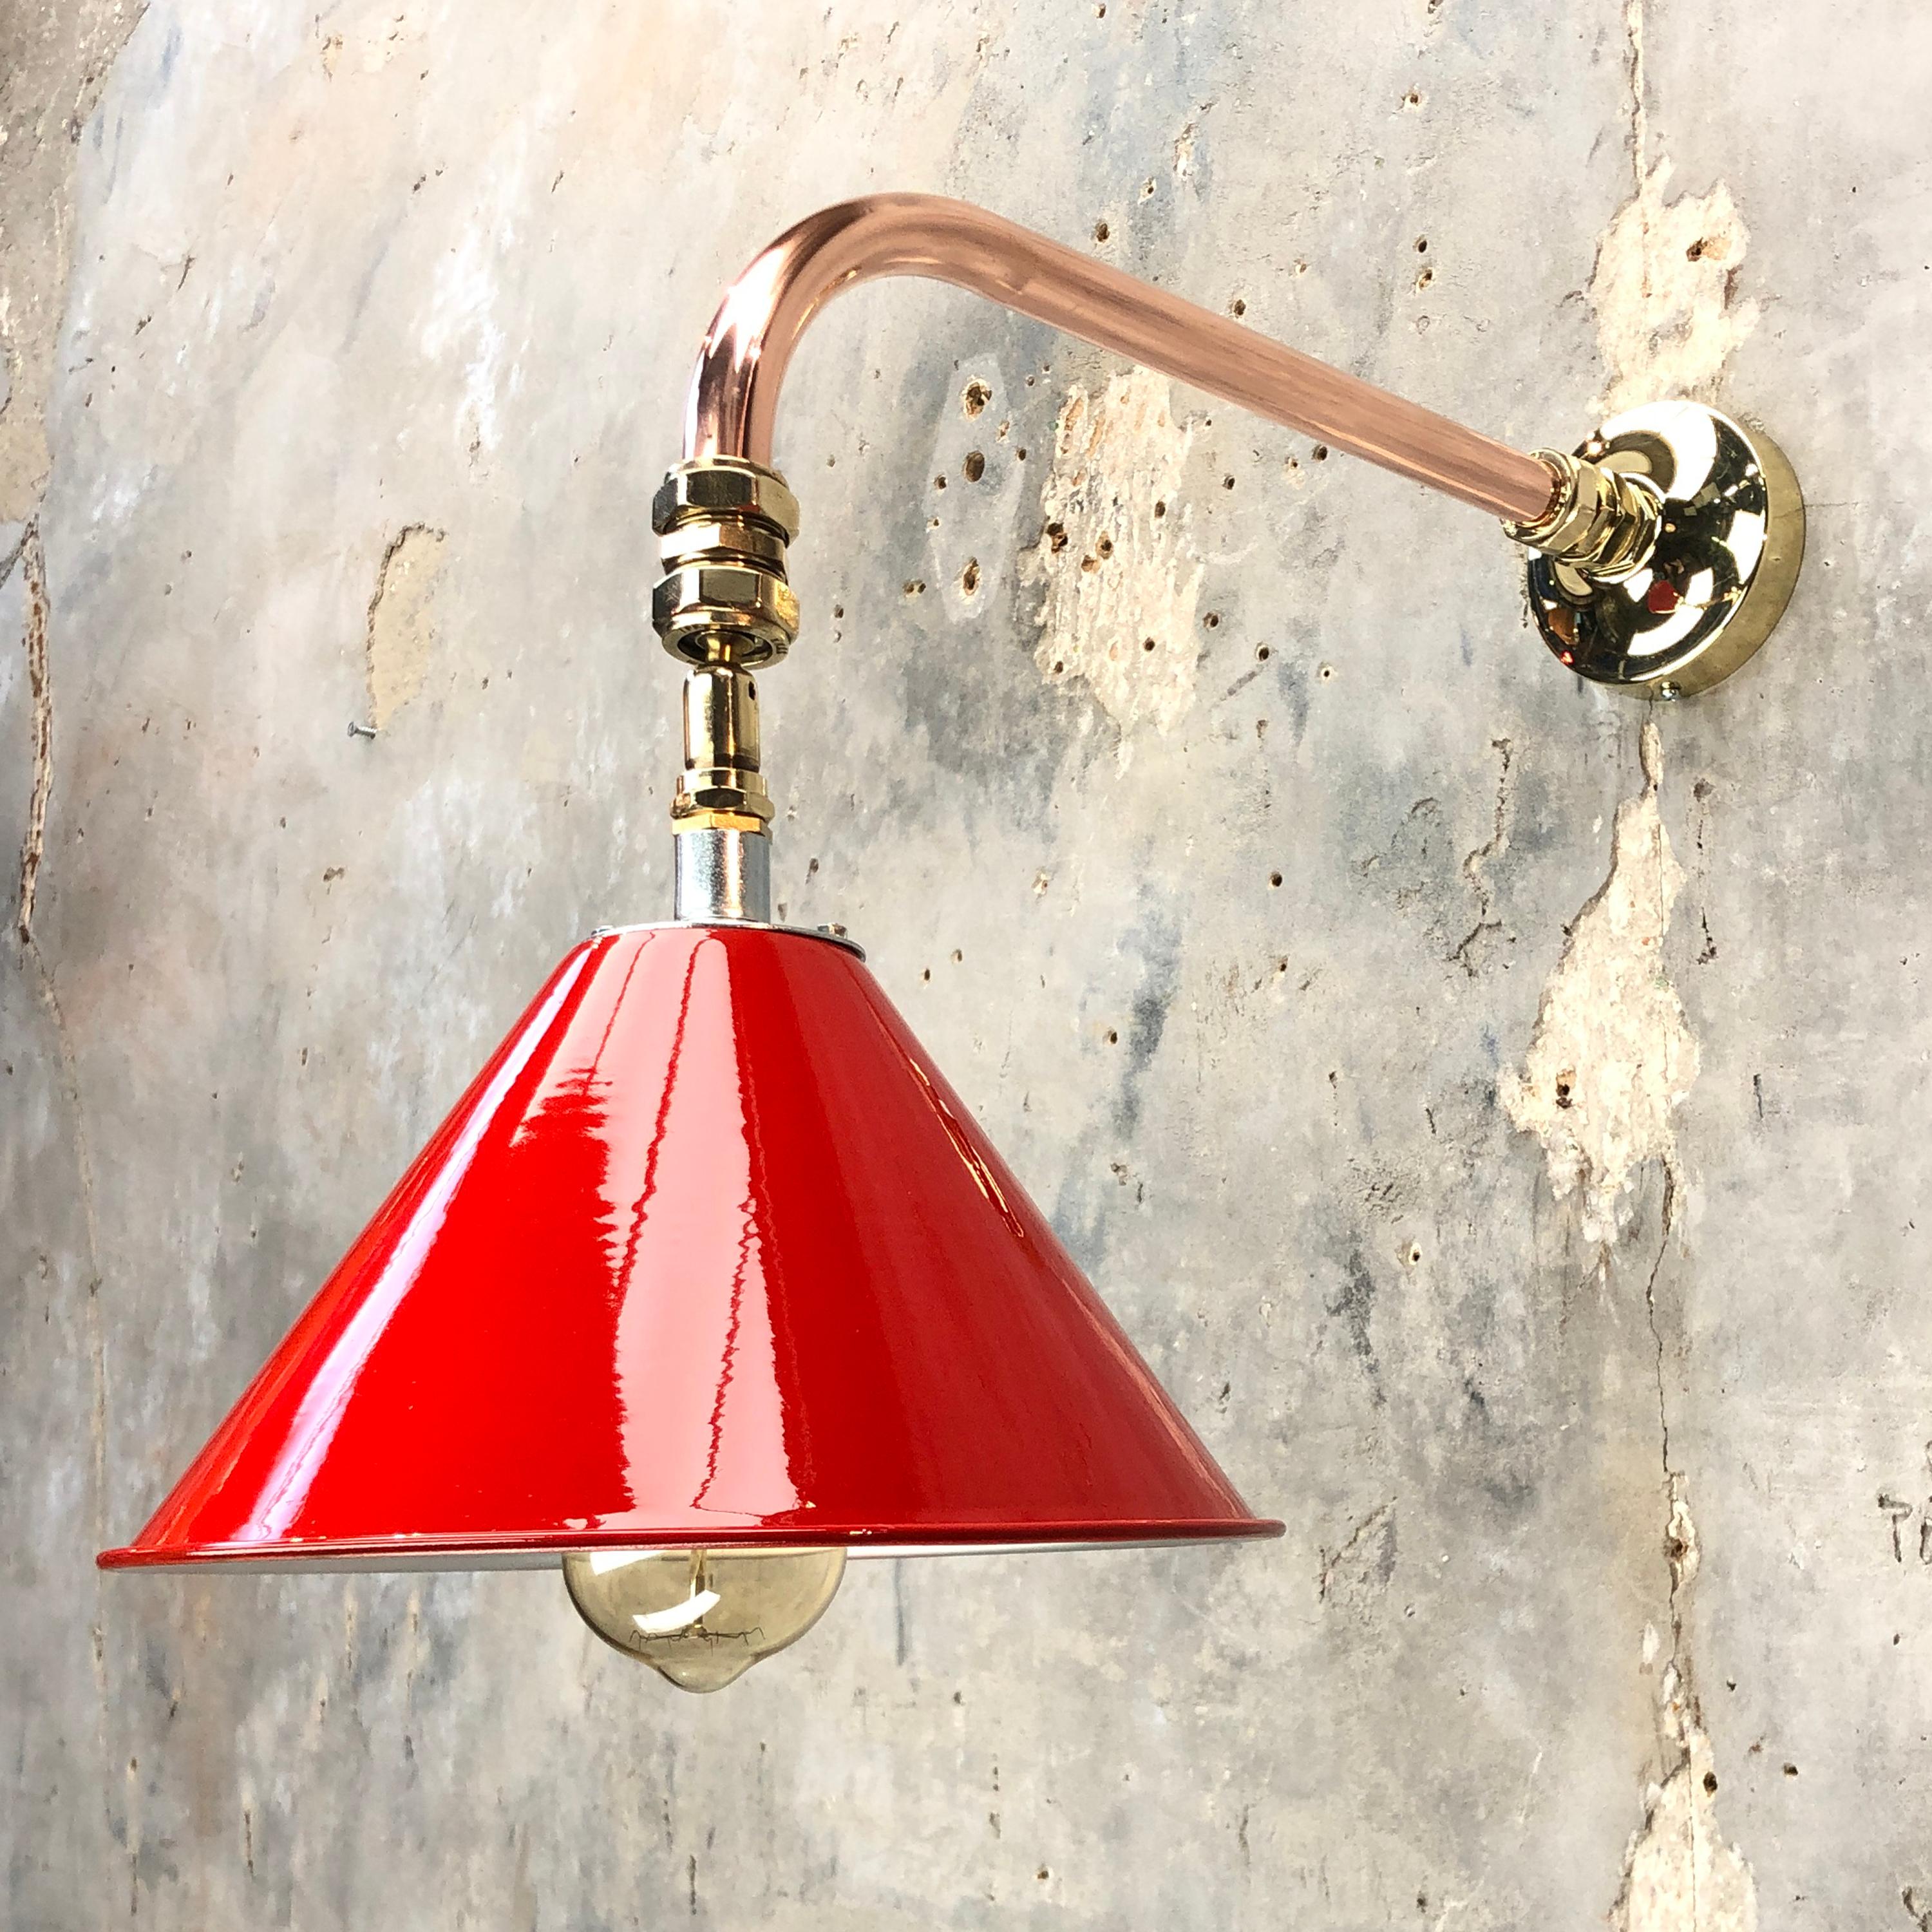 Industrial 1980 British Army Lamp Shade in Red with Copper Cantilever Wall Lamp Edison Bulb For Sale